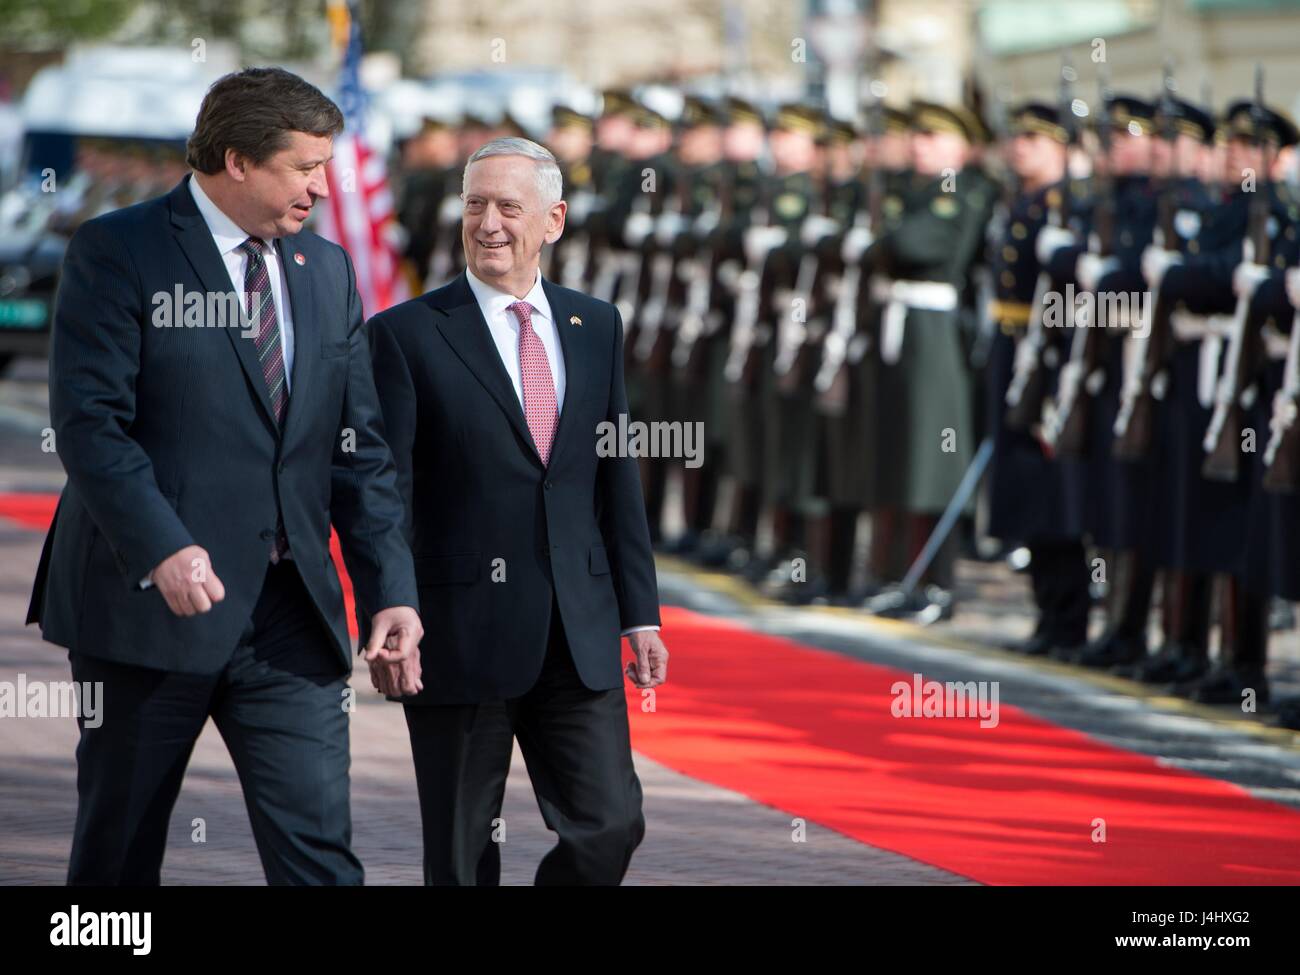 U.S. Secretary of Defense James Mattis is escorted by Lithuanian Defence Minister Raimundas Karoblis during a review of the honor guard on arrival for meetings at the Ministry of Defence May 10, 2017 in Vilnius, Lithuania. Stock Photo